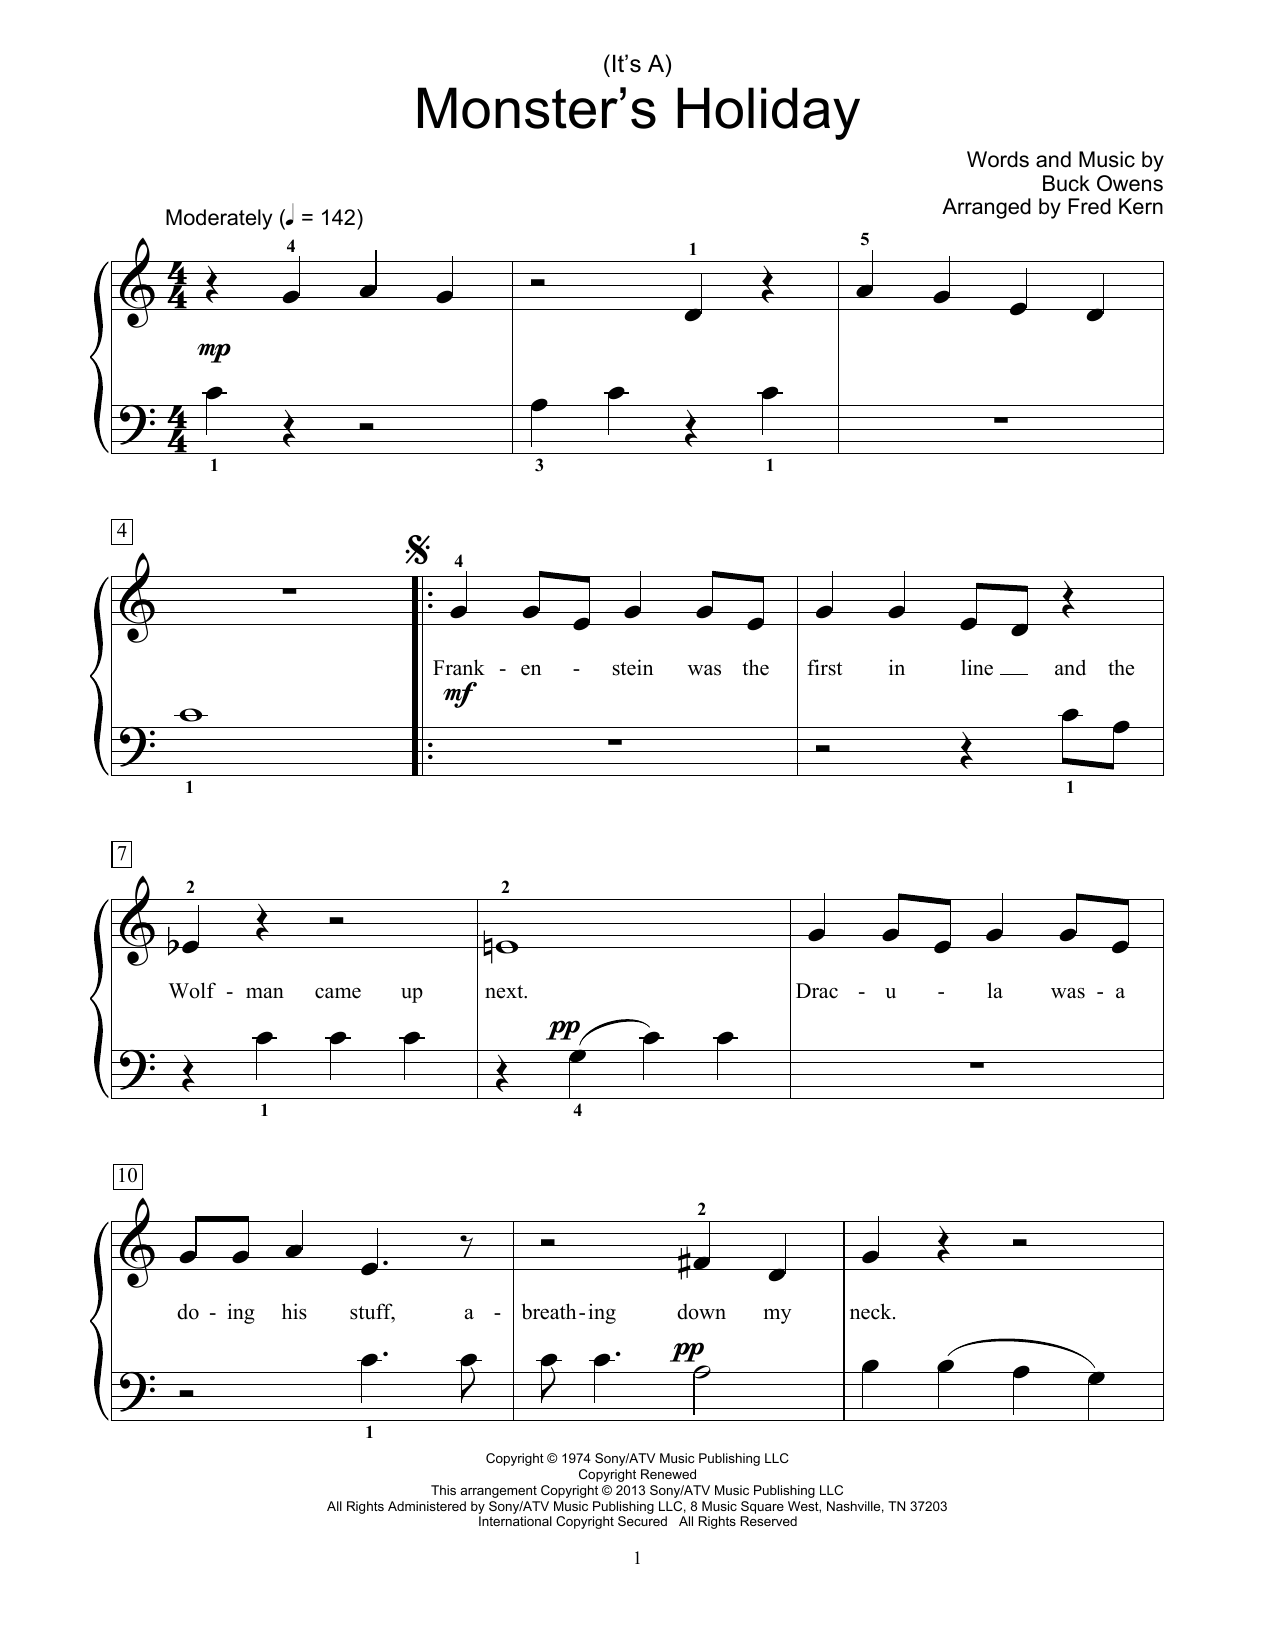 Fred Kern (It's A) Monster's Holiday sheet music notes and chords. Download Printable PDF.